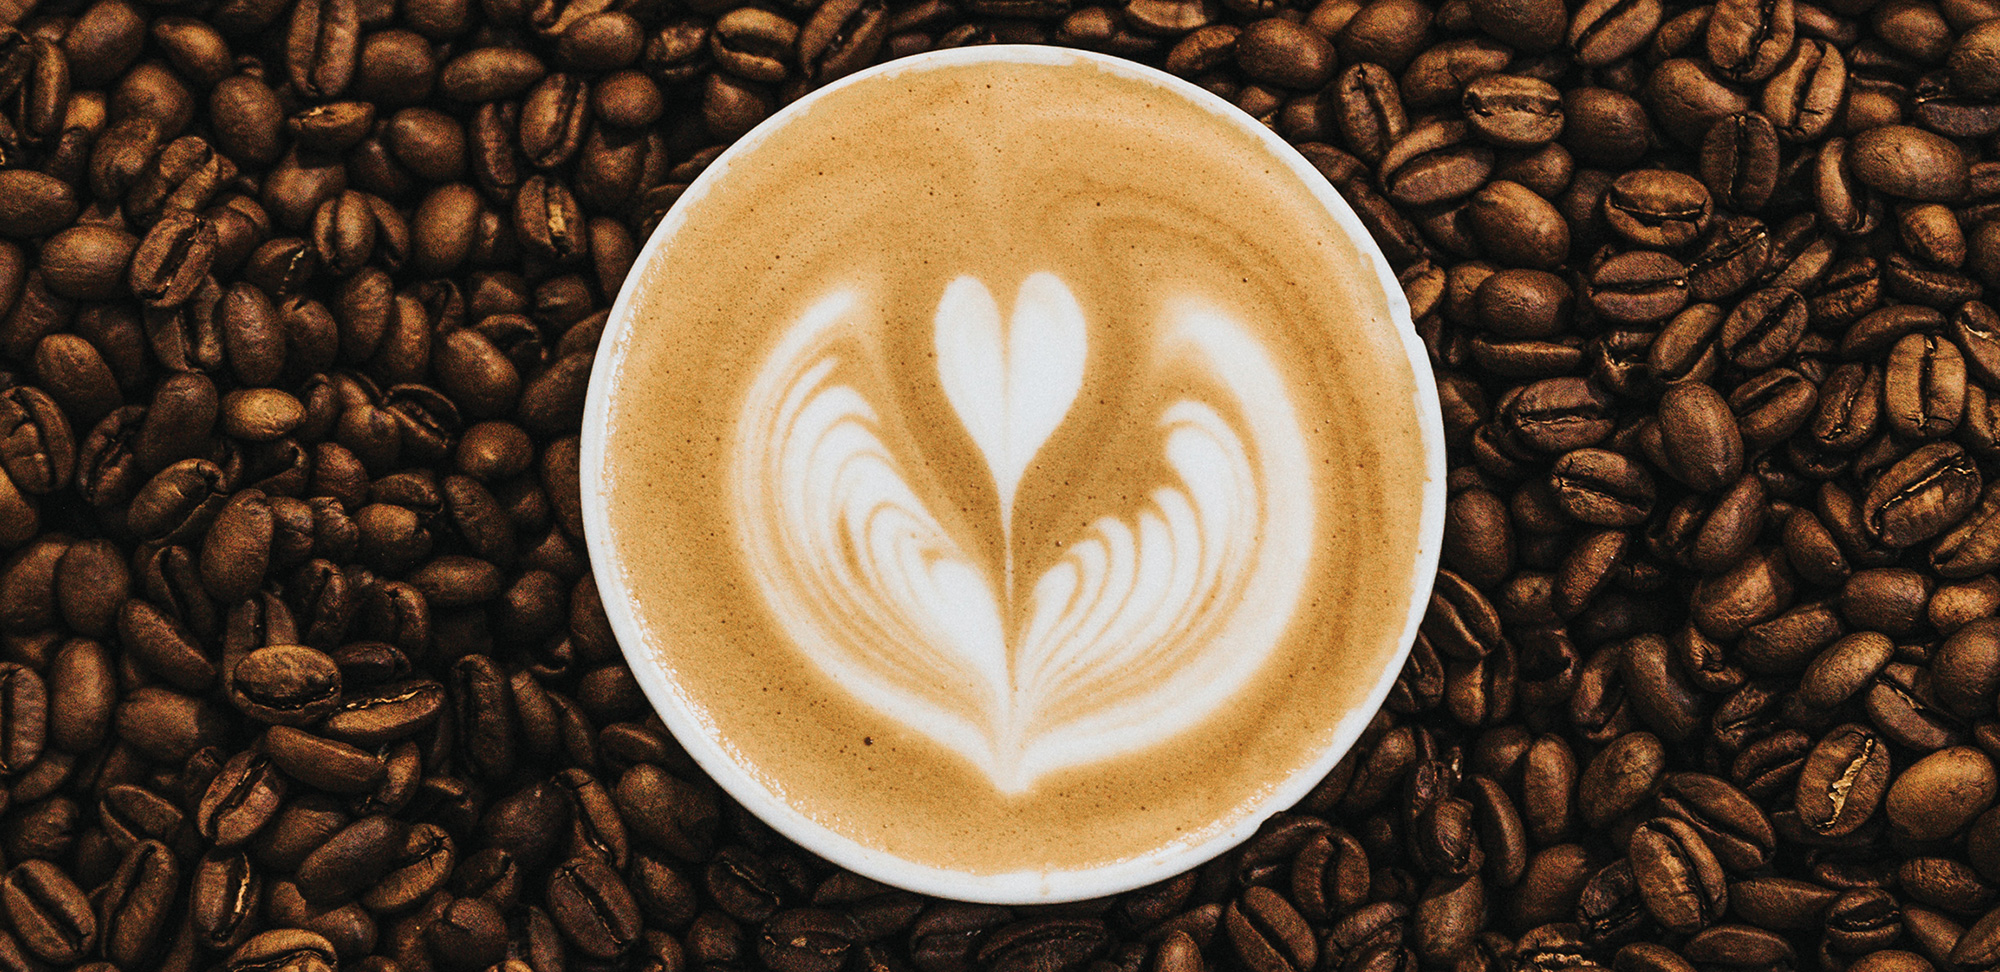 Coffee drinkers have a reduced risk of heart disease or cancer